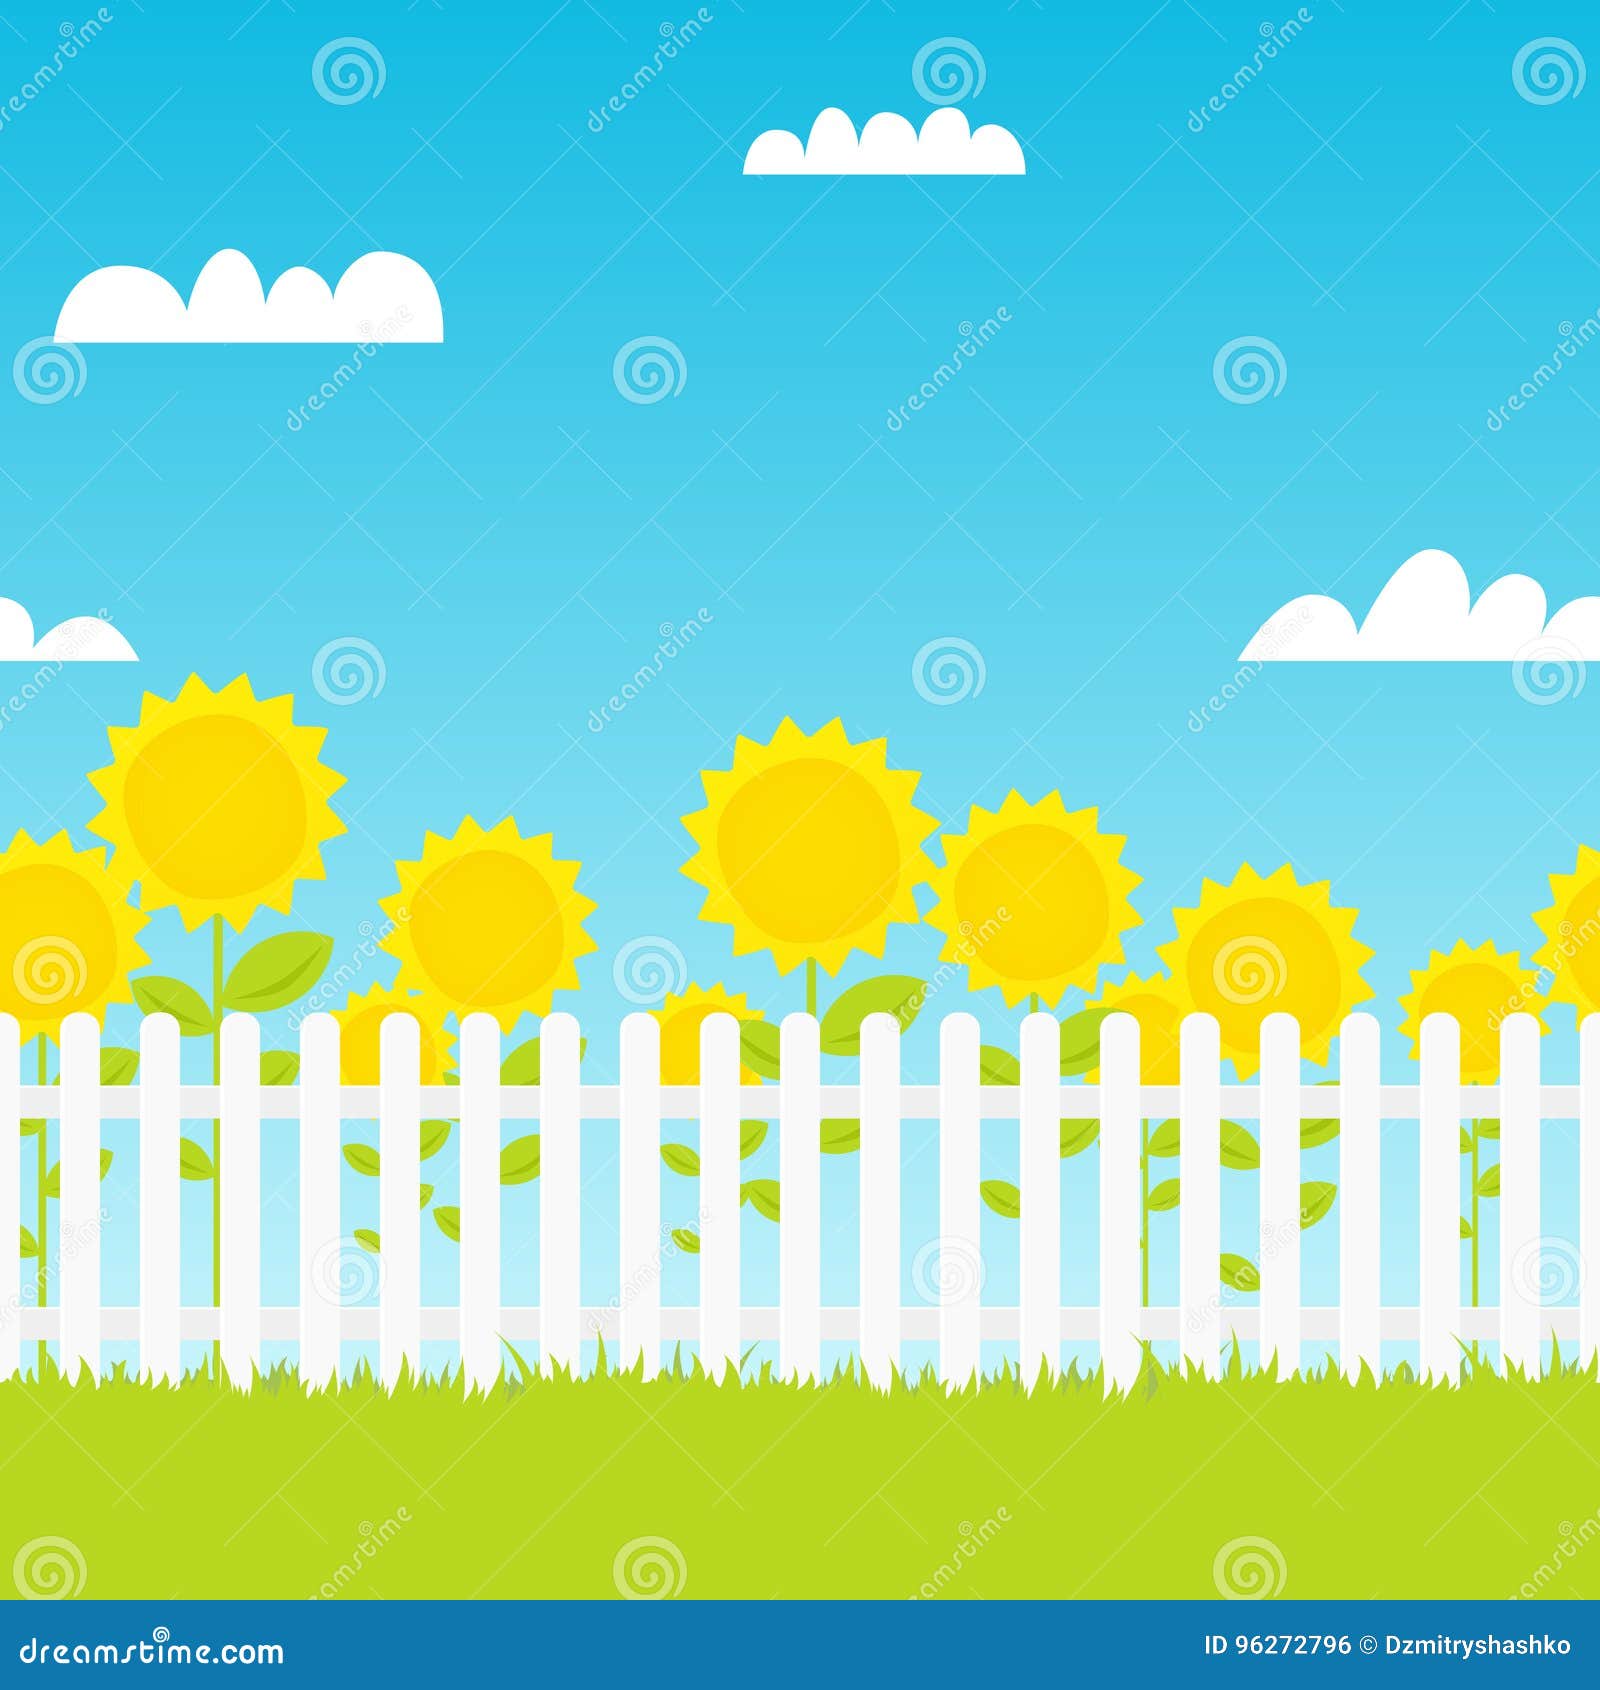 white picket fence with sunflowers